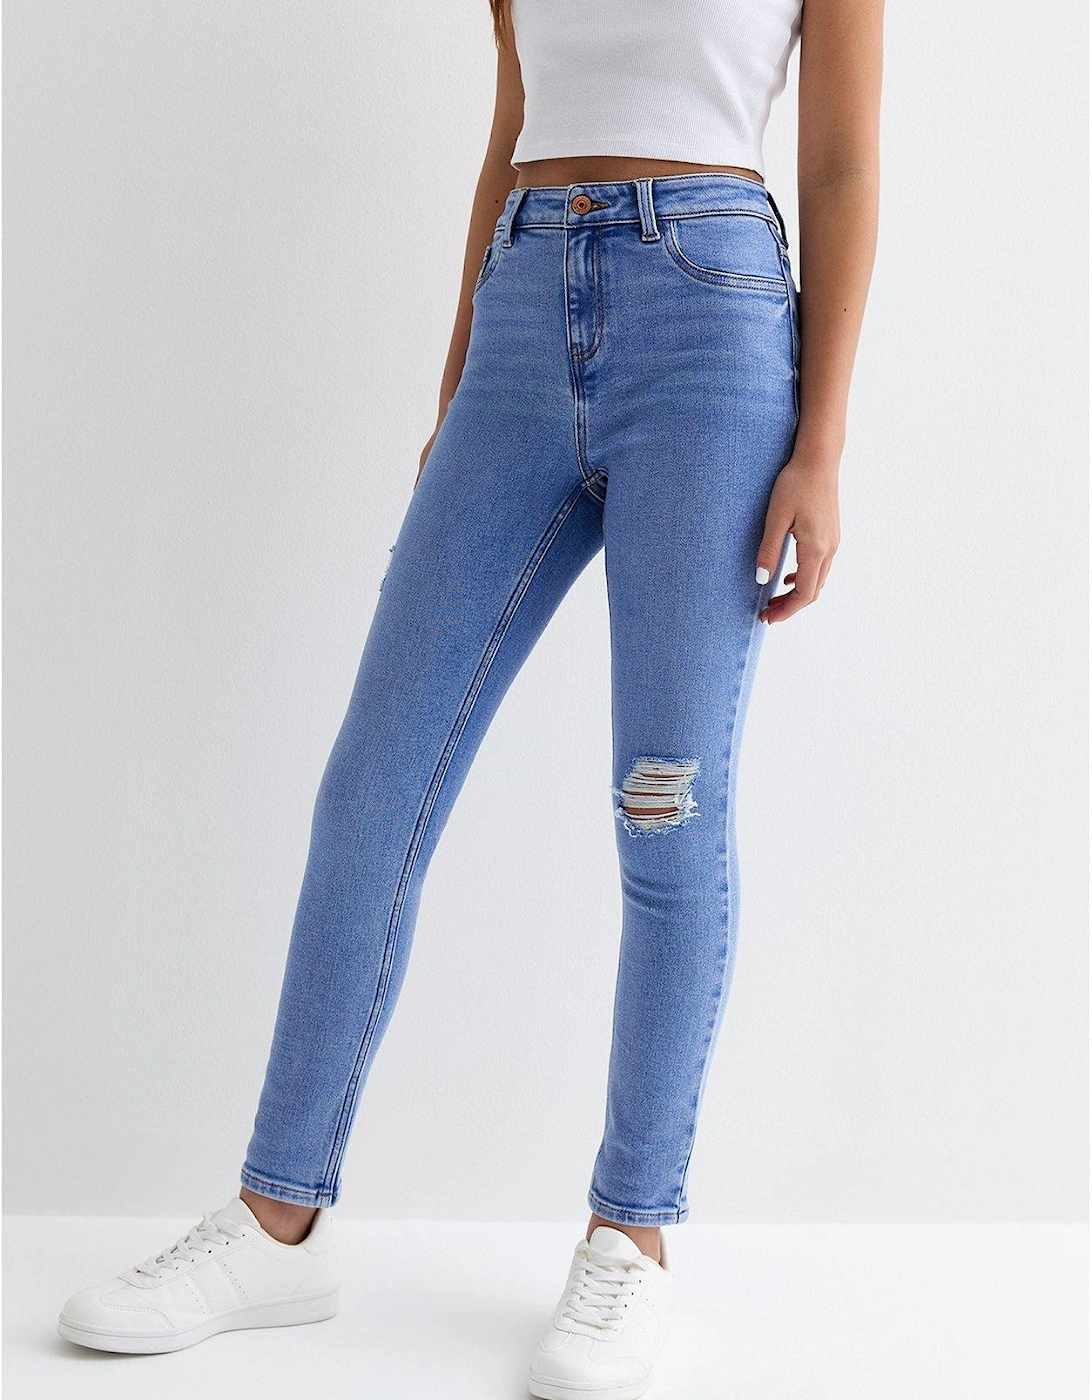 Girls Pale Blue High Waist Ripped Knee Hallie Skinny Jeans, 6 of 5